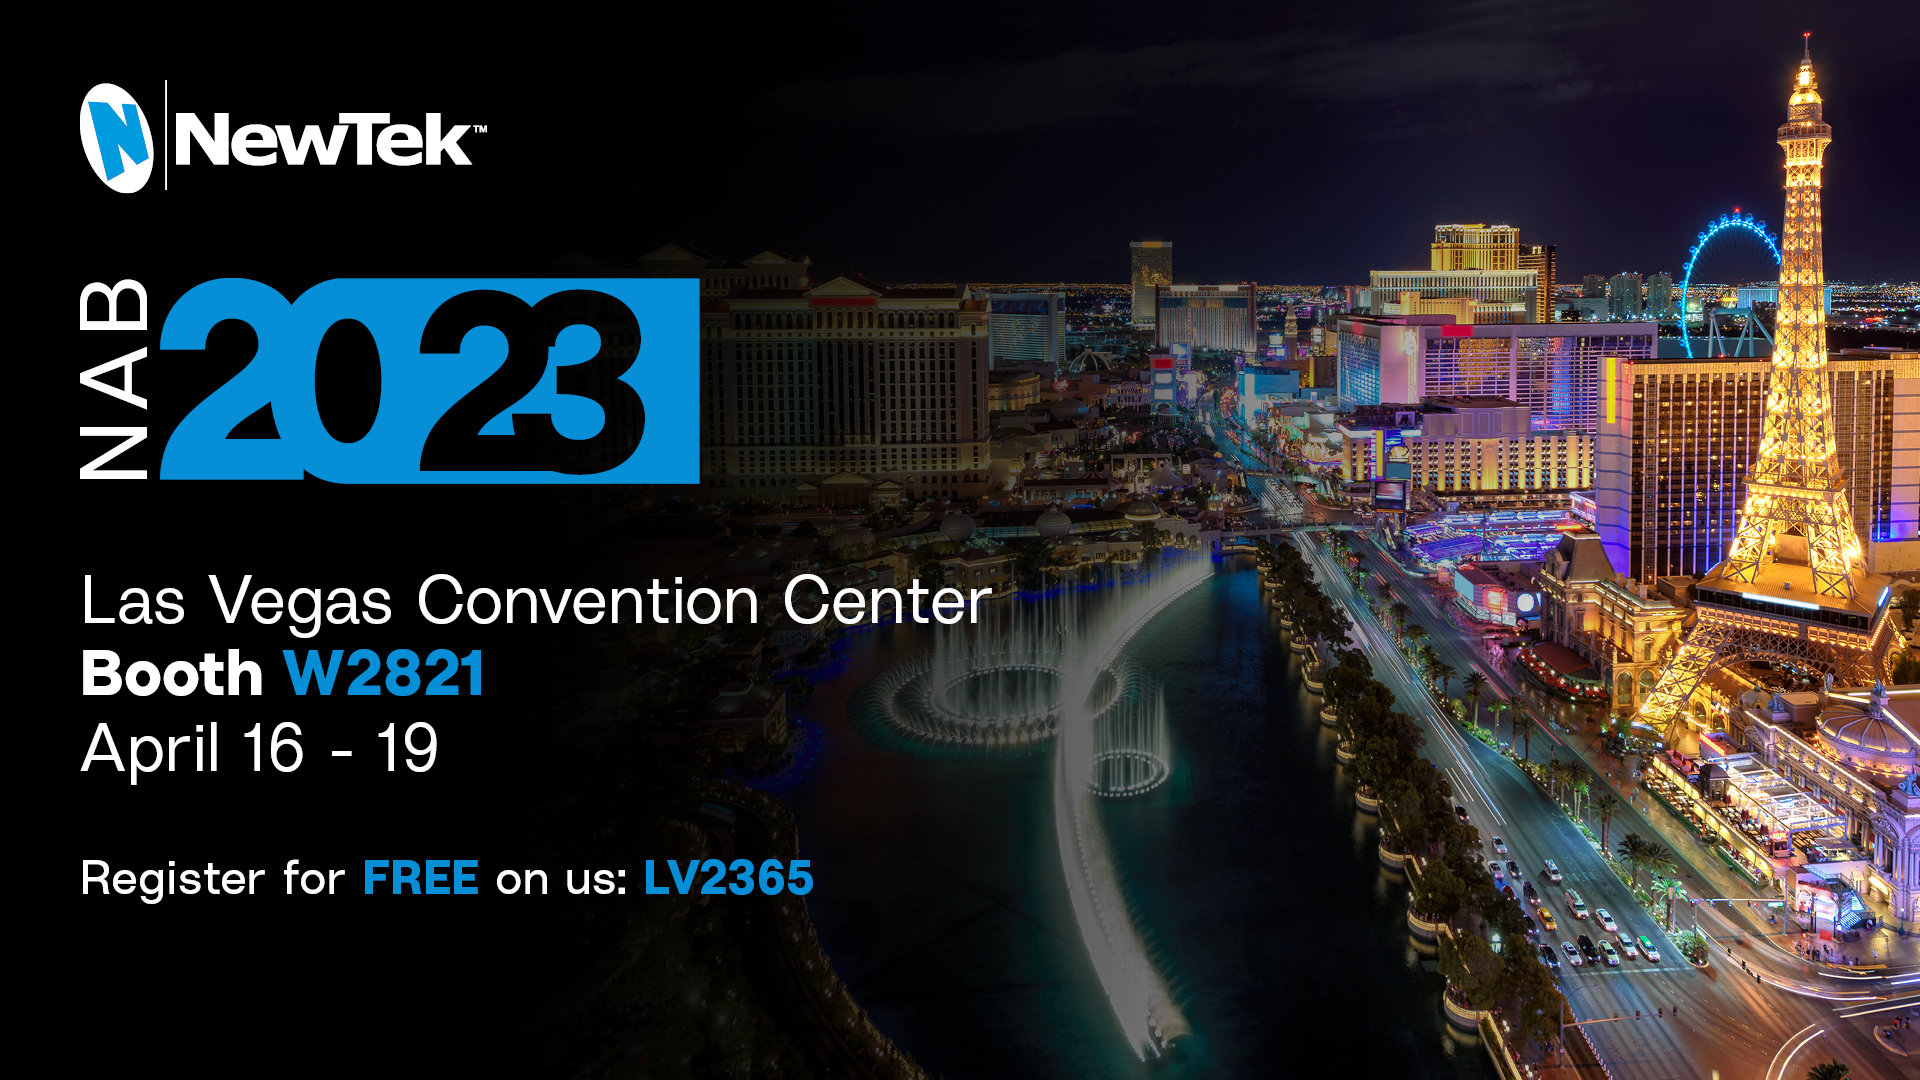 NewTek NAB 2023 | Whilst we are saddened not to be able to connect with many of our customers, partners and friends in person at NAB, we fully support the difficult decision made by the organisers. Instead of meeting in Las Vegas, our local teams in the US and around the world stand ready to support our customers across a number of alternative channels.